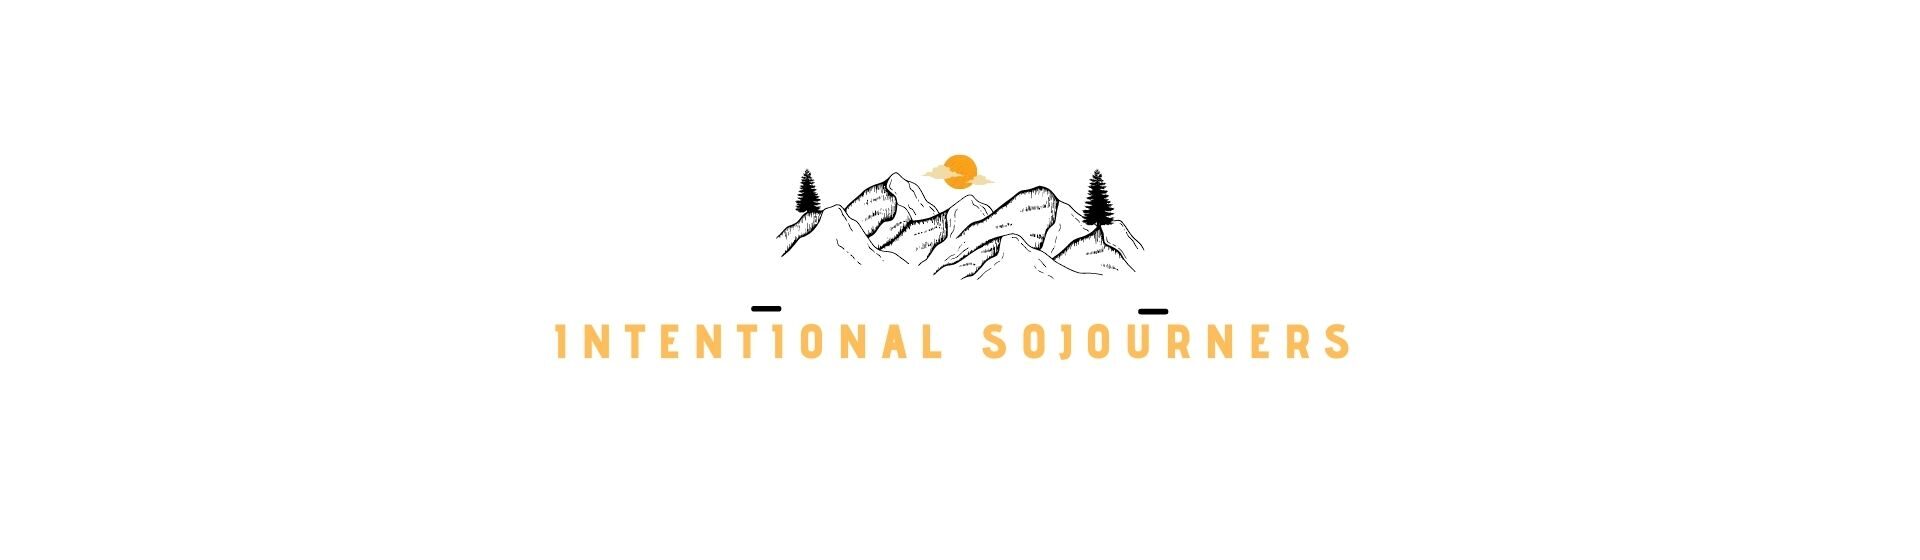 Intentional Sojourners